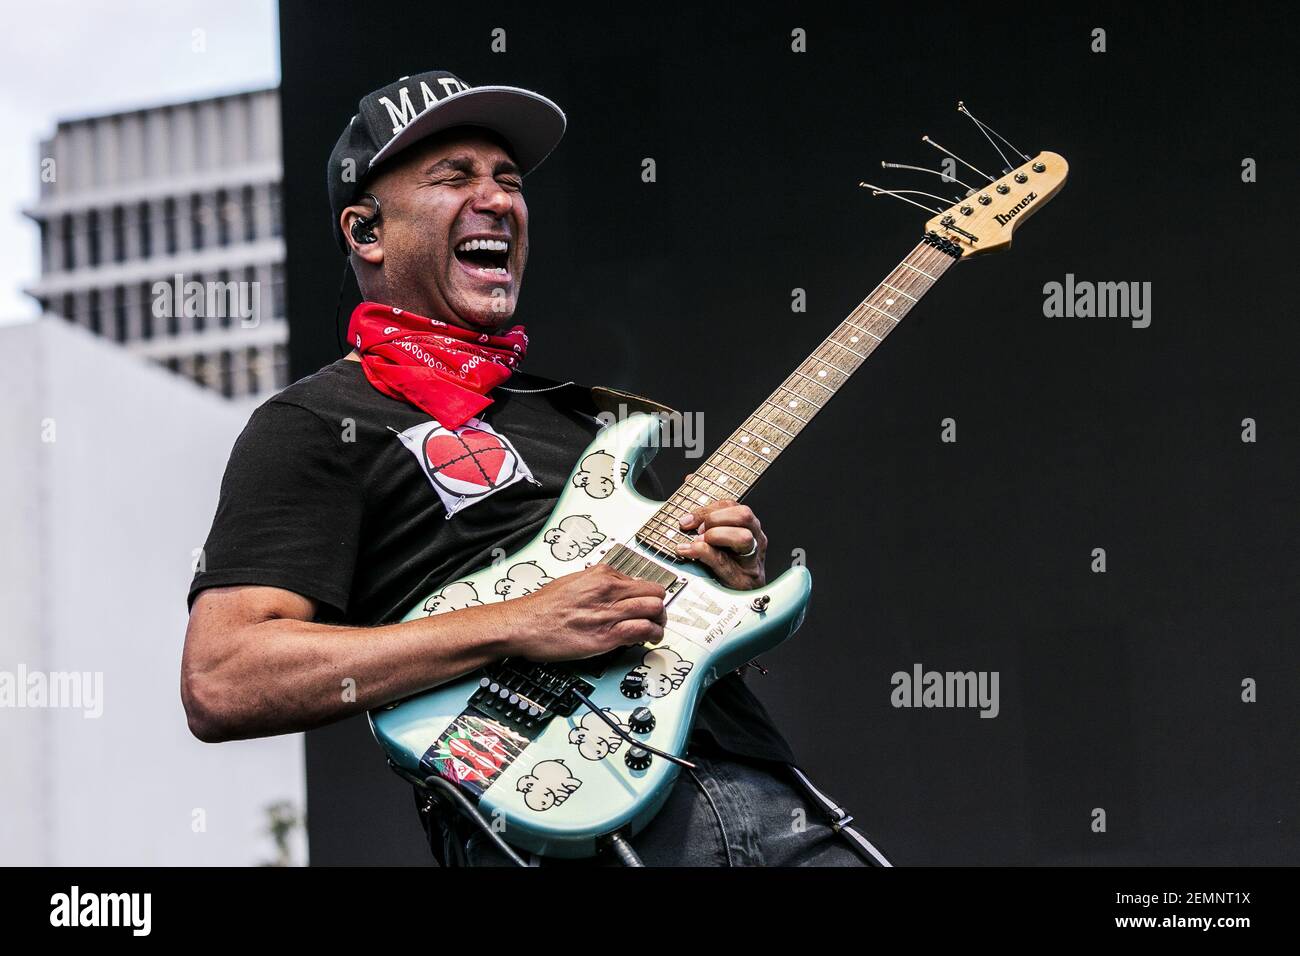 Guitarist Tom Morello performs at the ACLU 100 tour at Grand Park in  downtown Los Angeles. The ACLU turns 100 years old this year. Tom Morello,  formerly with the band "Rage Against